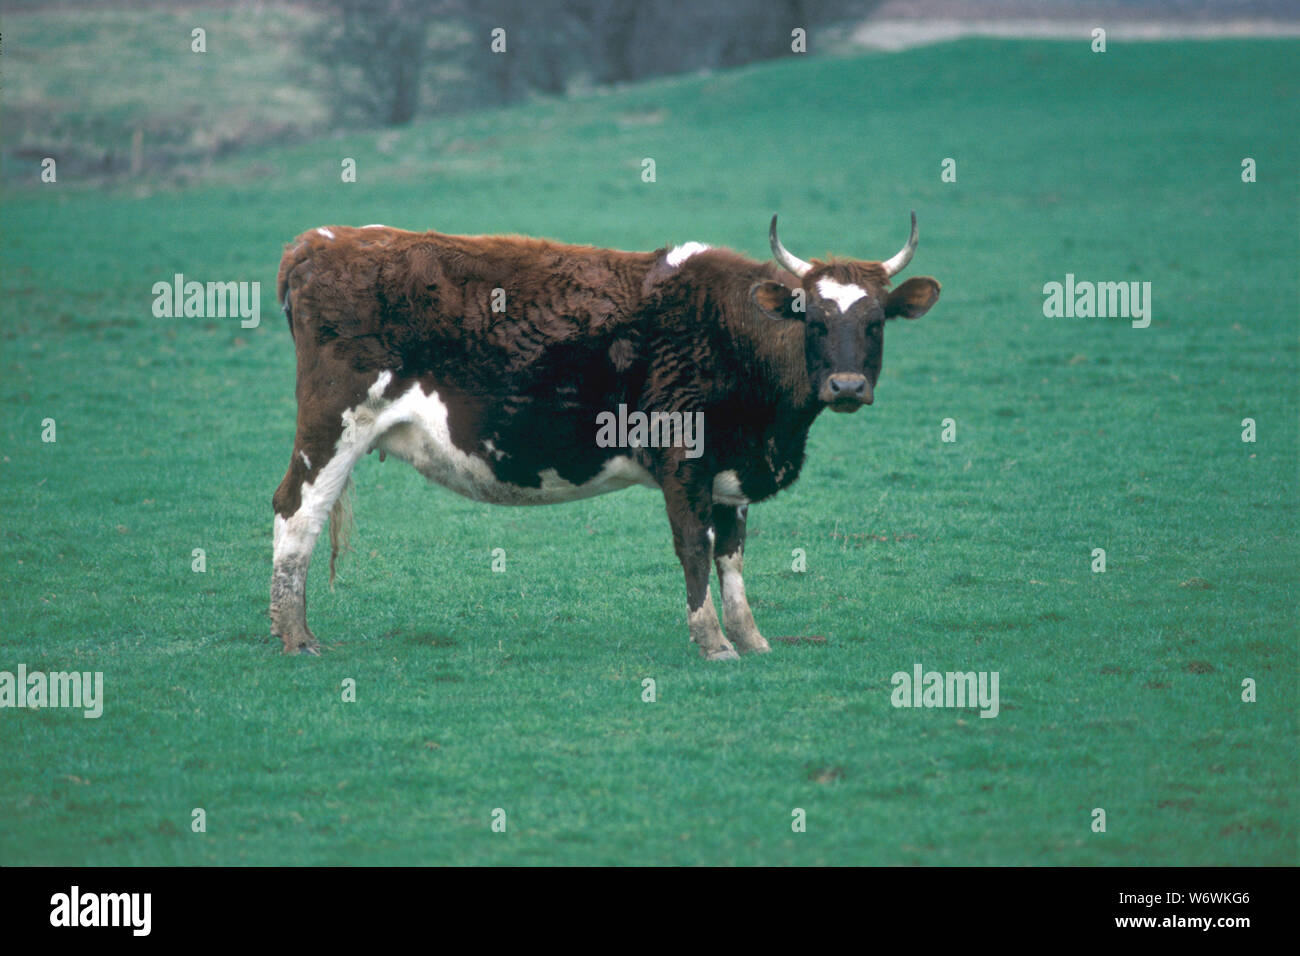 AYRSHIRE COW. (Bos taurus). A Scottish domestic breed. This animal has retained horns ie 'None polled'. A breed is known as a productive high milk yielder. Stock Photo